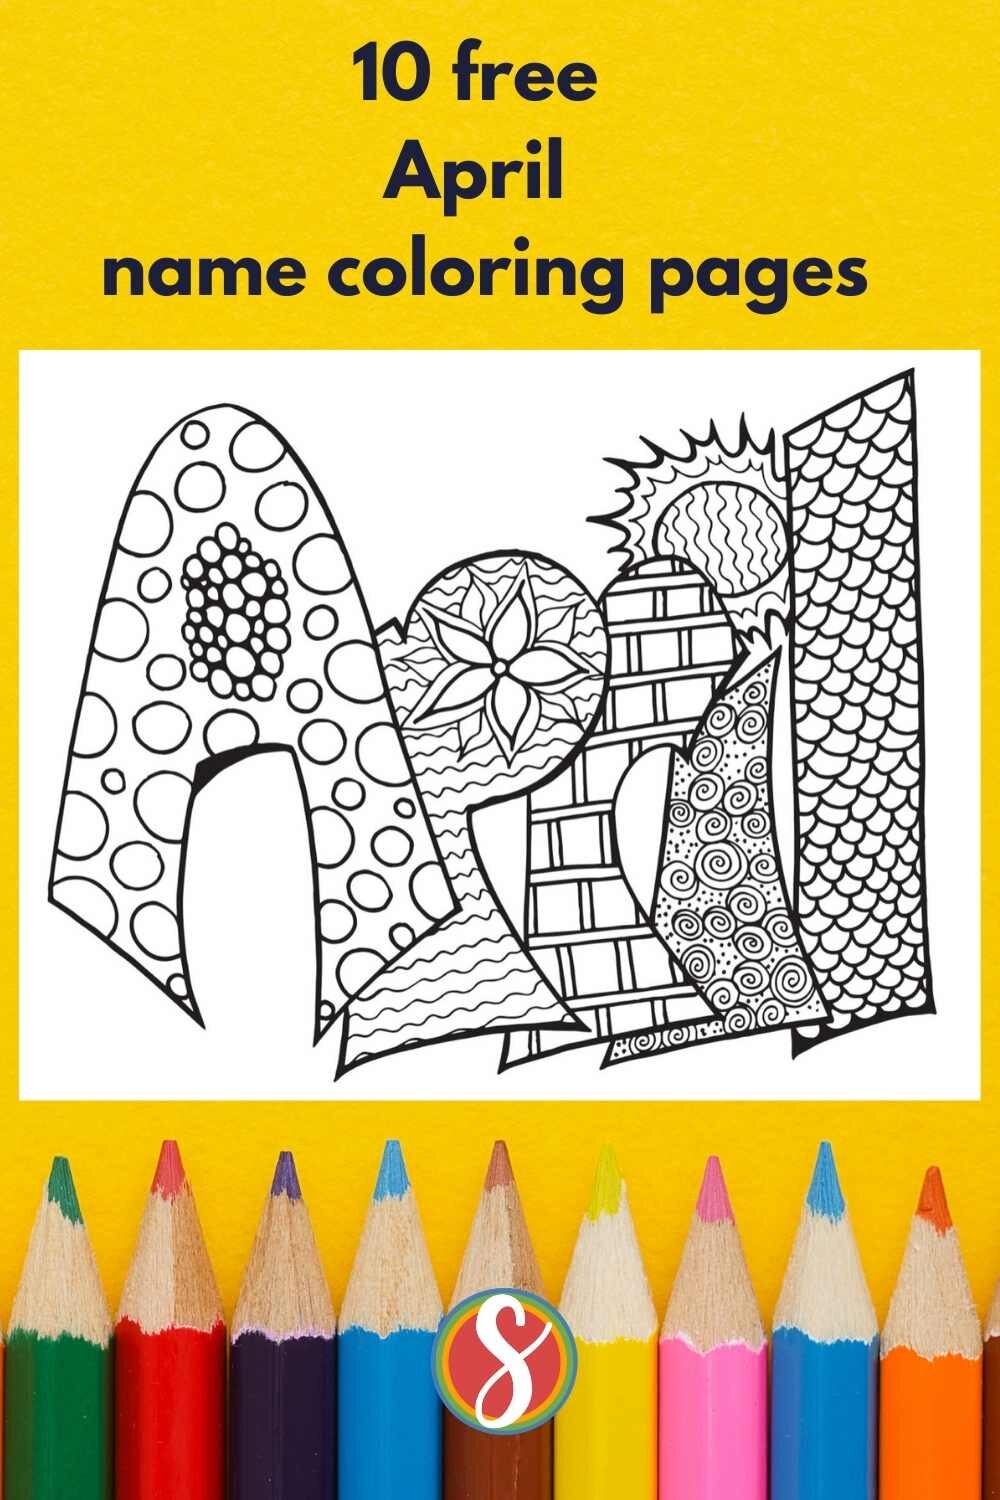 April name coloring pages from Stevie Doodles